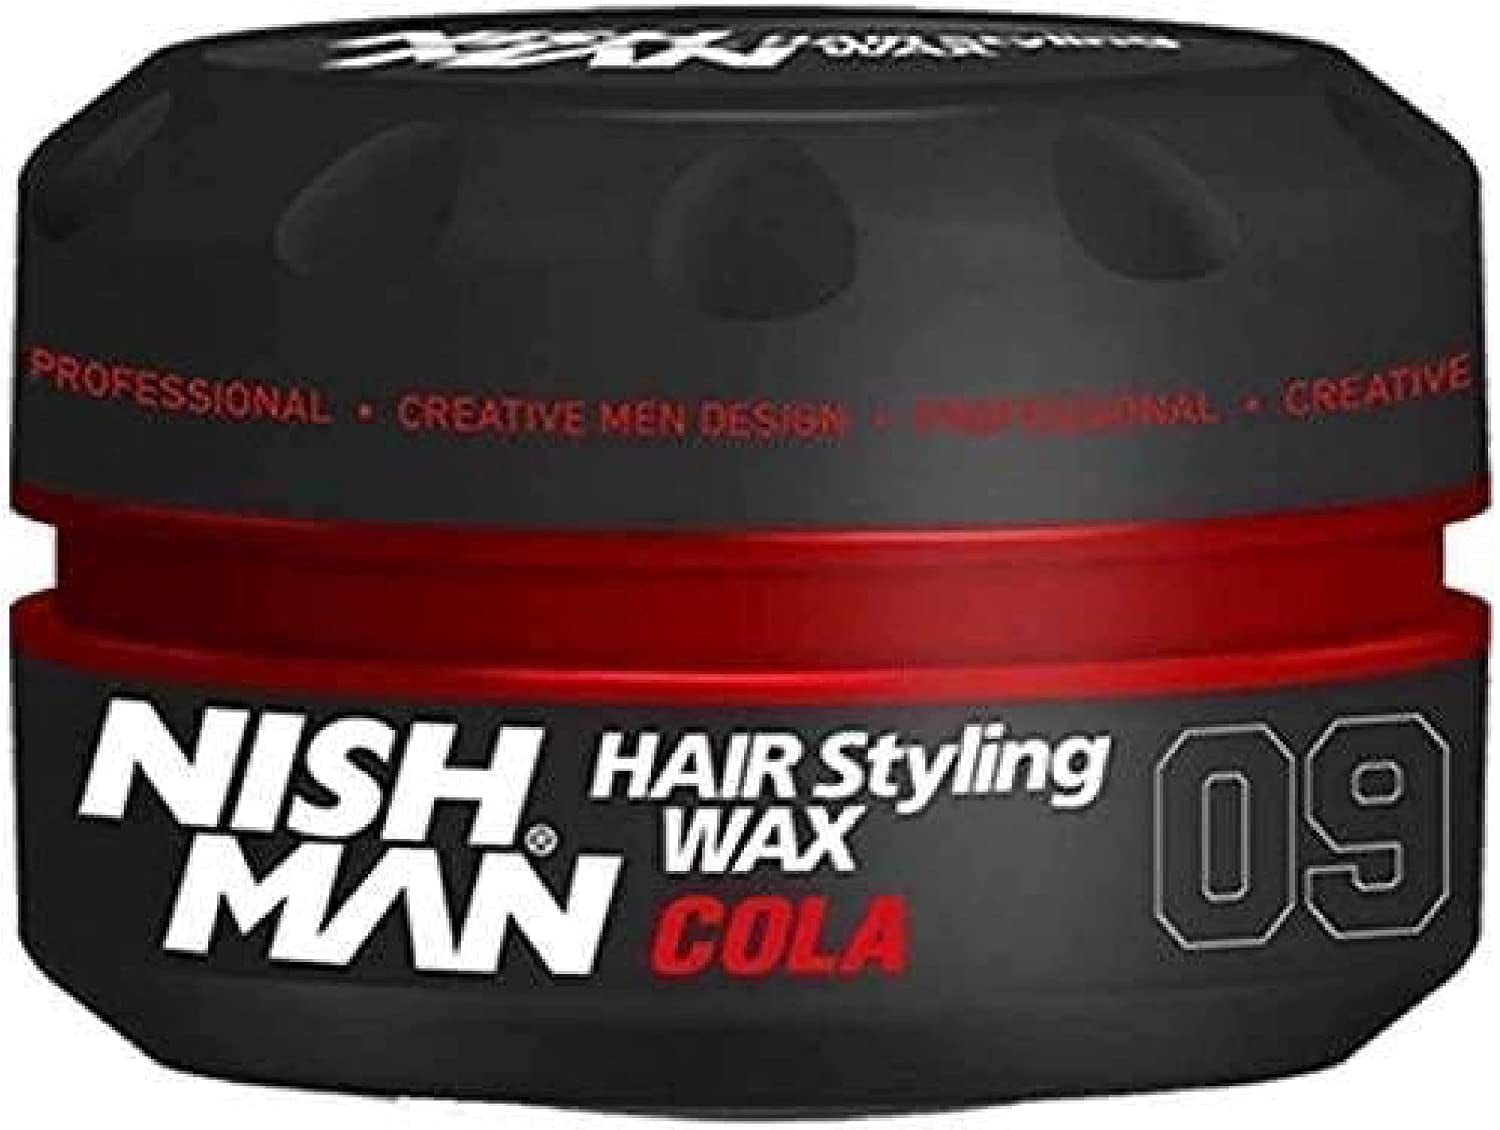 Give strength and flexibility to your hair. Nishman Spider Wax takes your  style to the next level! 🕷️